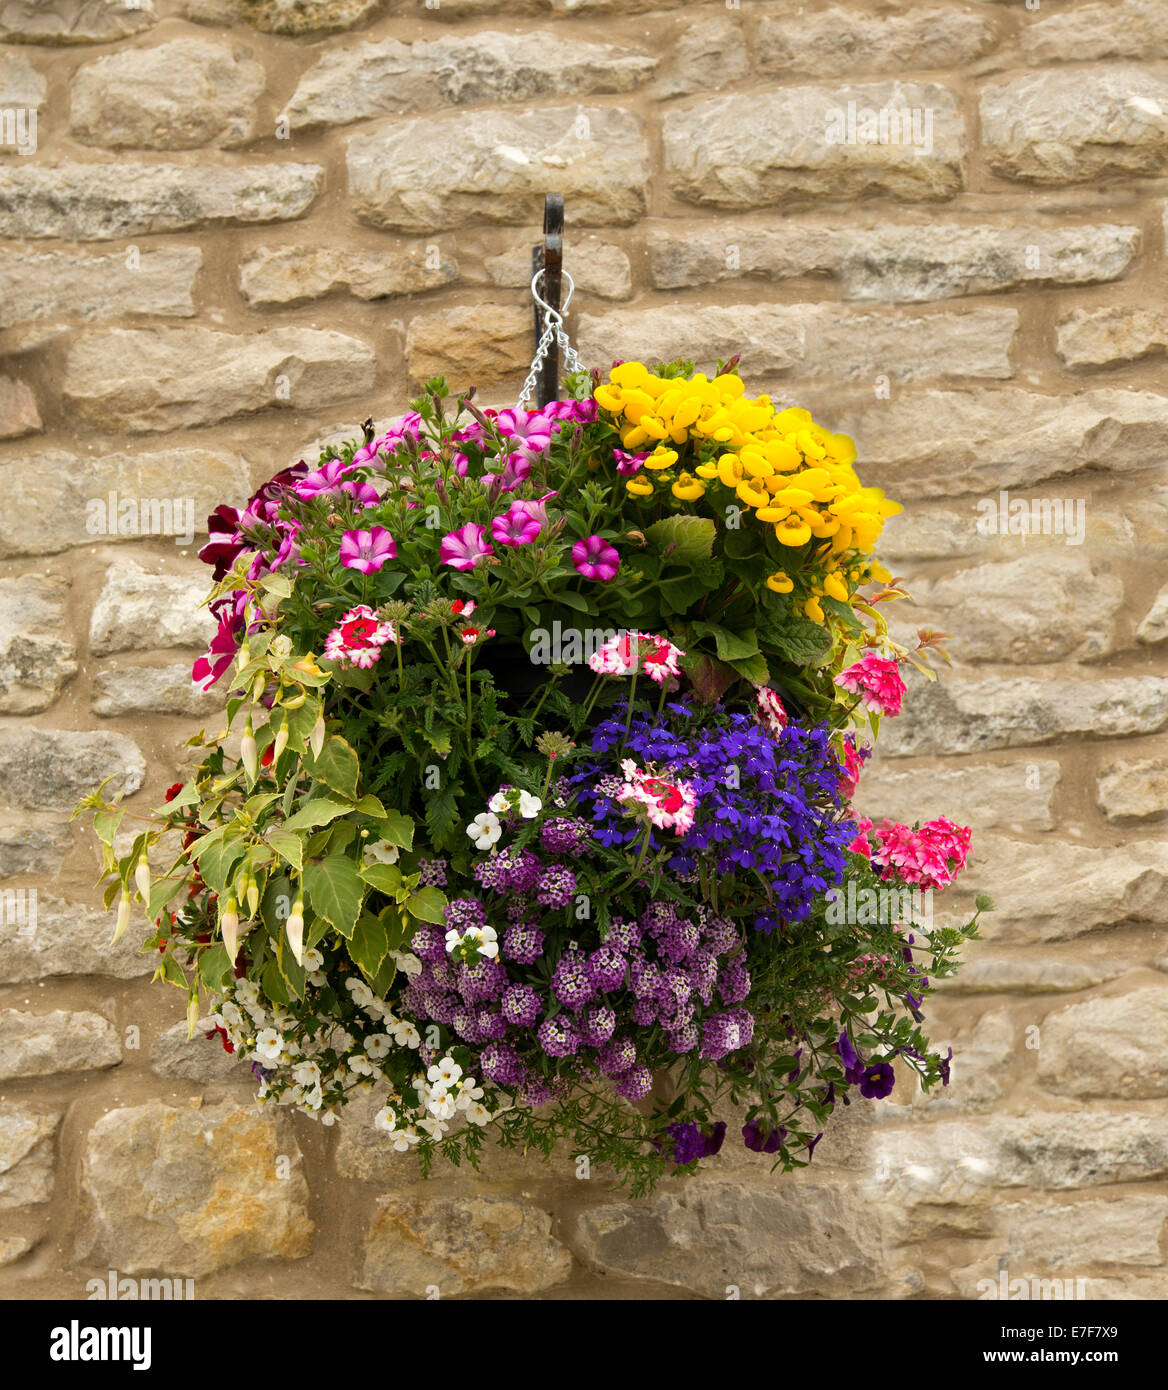 Hanging basket with spectacular mass of brightly coloured flowers, pink ...